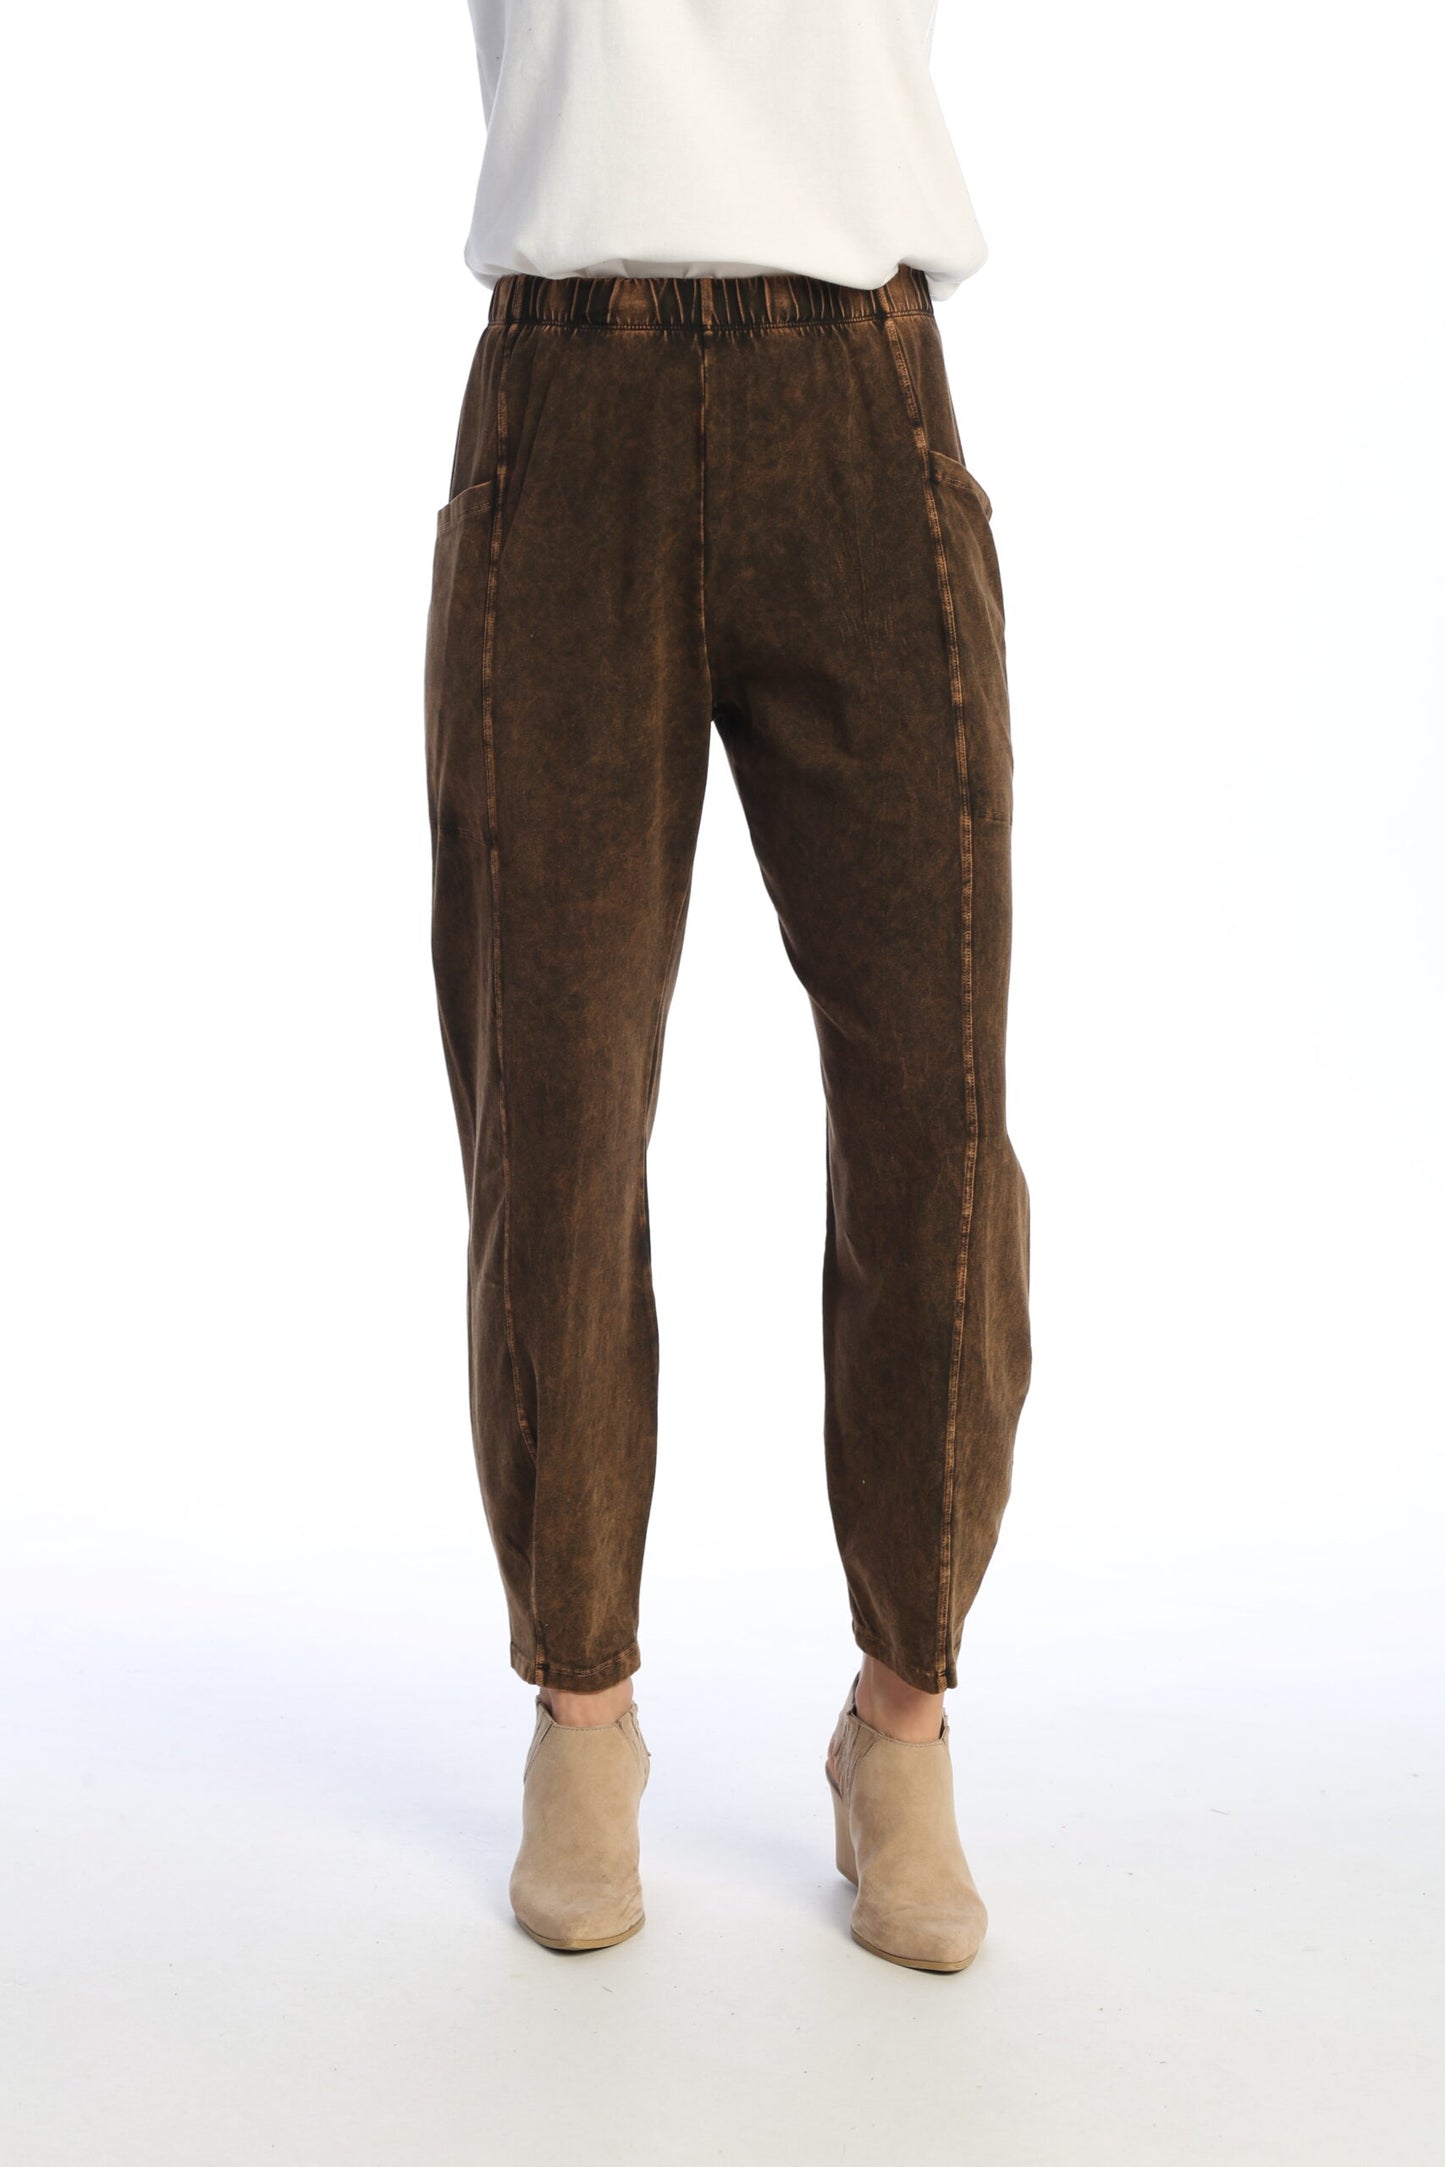 Load image into Gallery viewer, Chocolate Mineral Washed Cotton Lantern Pants With Side Patch Pockets
